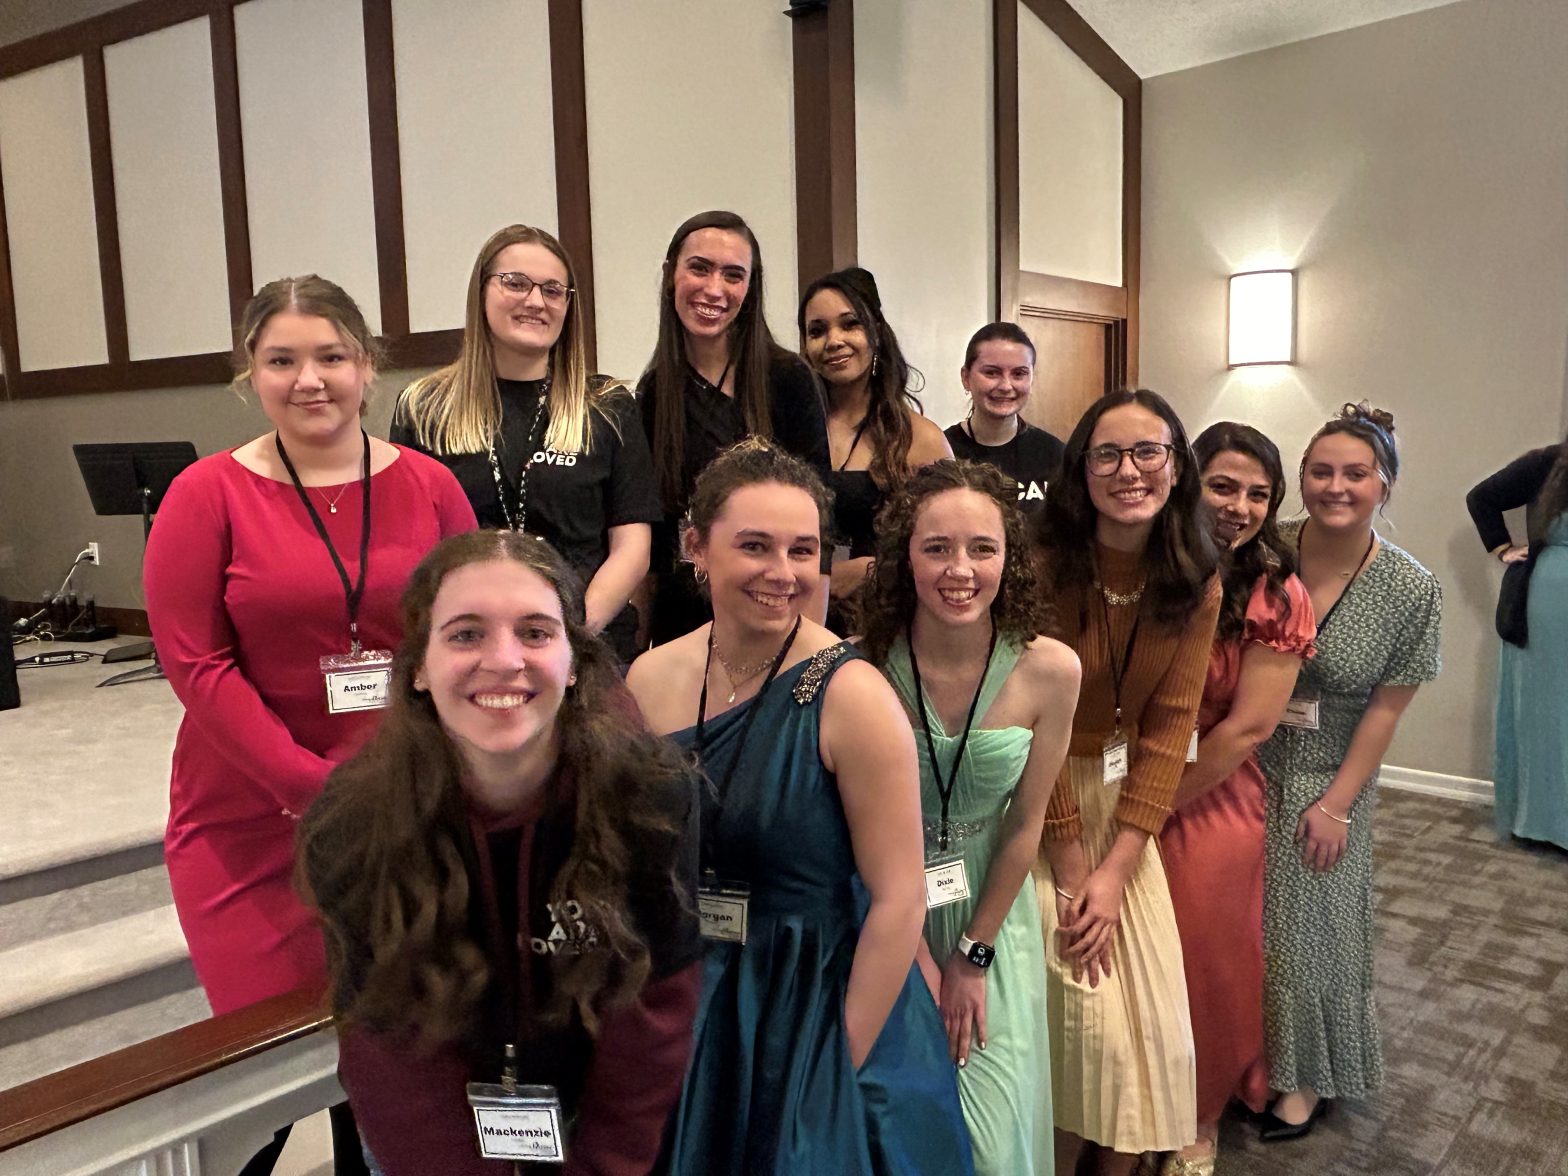 Occupational Therapy Assistant students enjoy "Night to Shine"